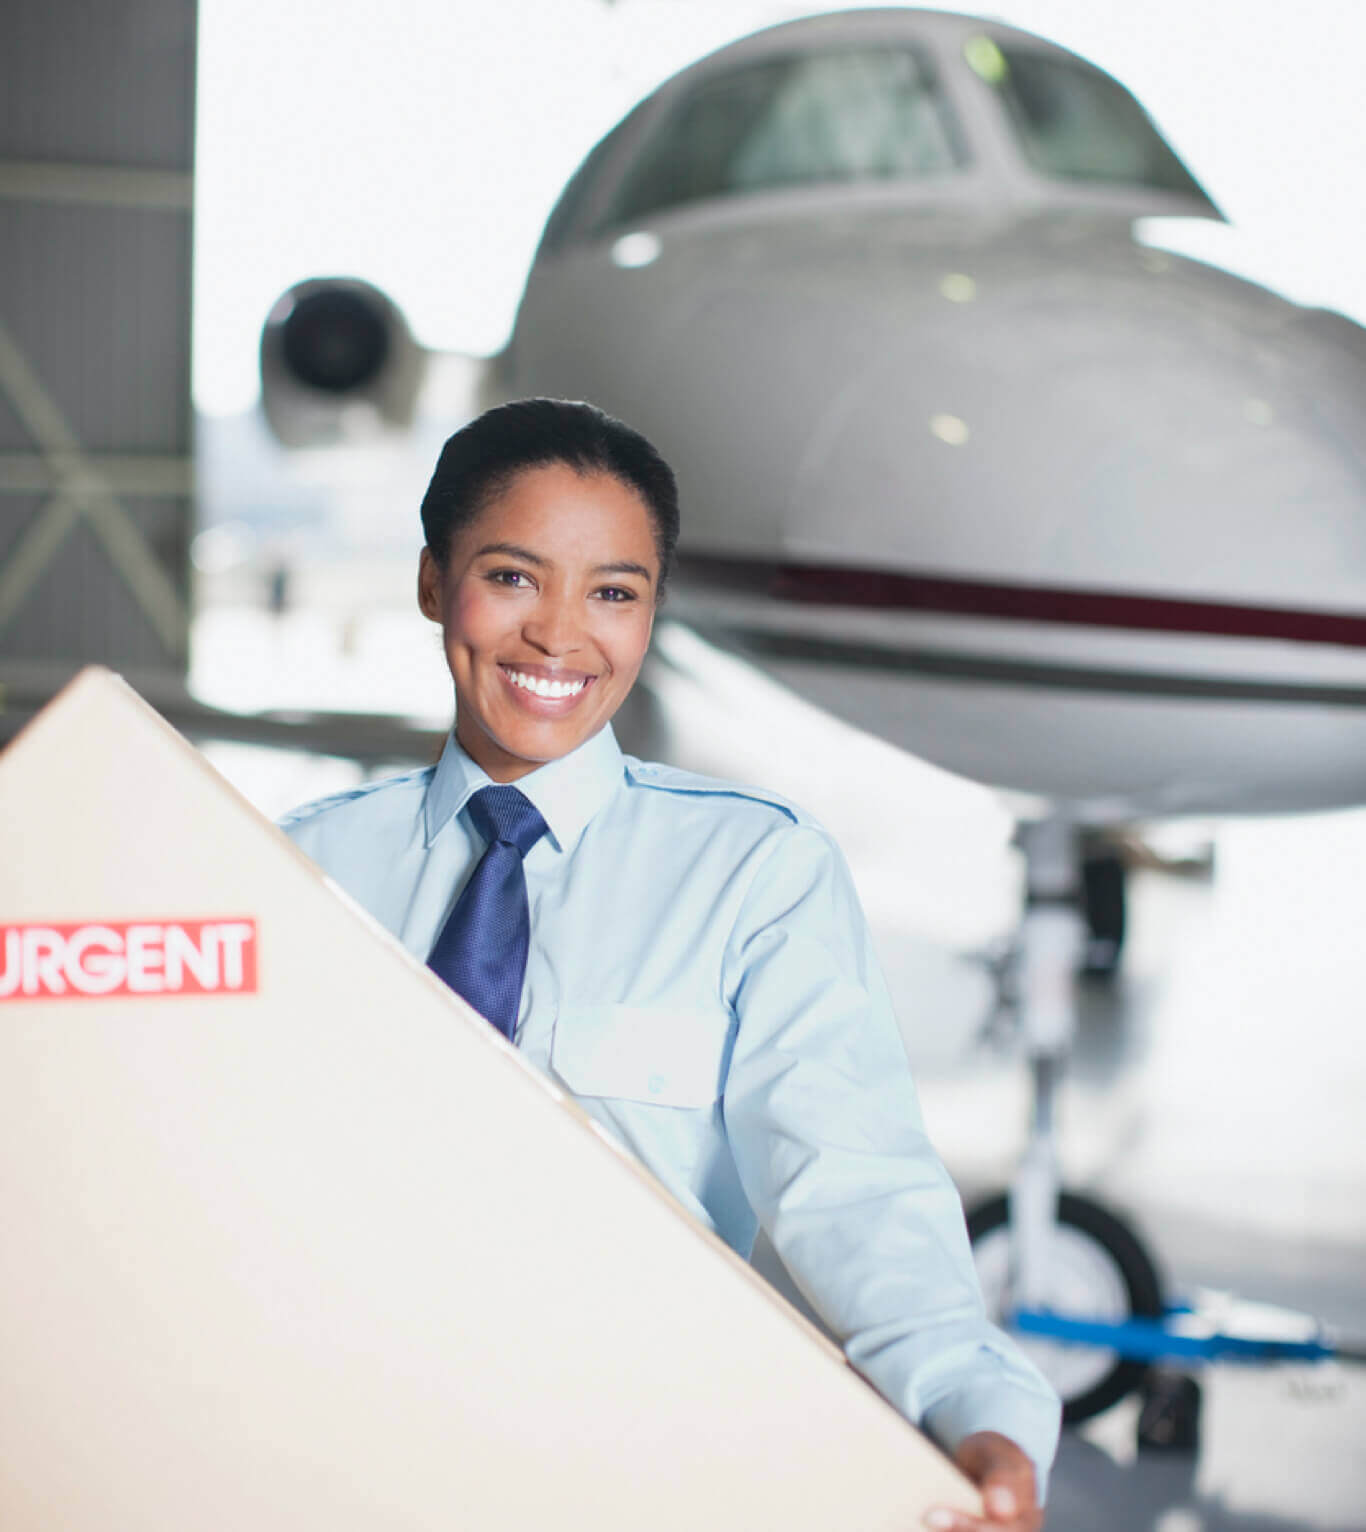 Our agents will get your package safely on the next flight out